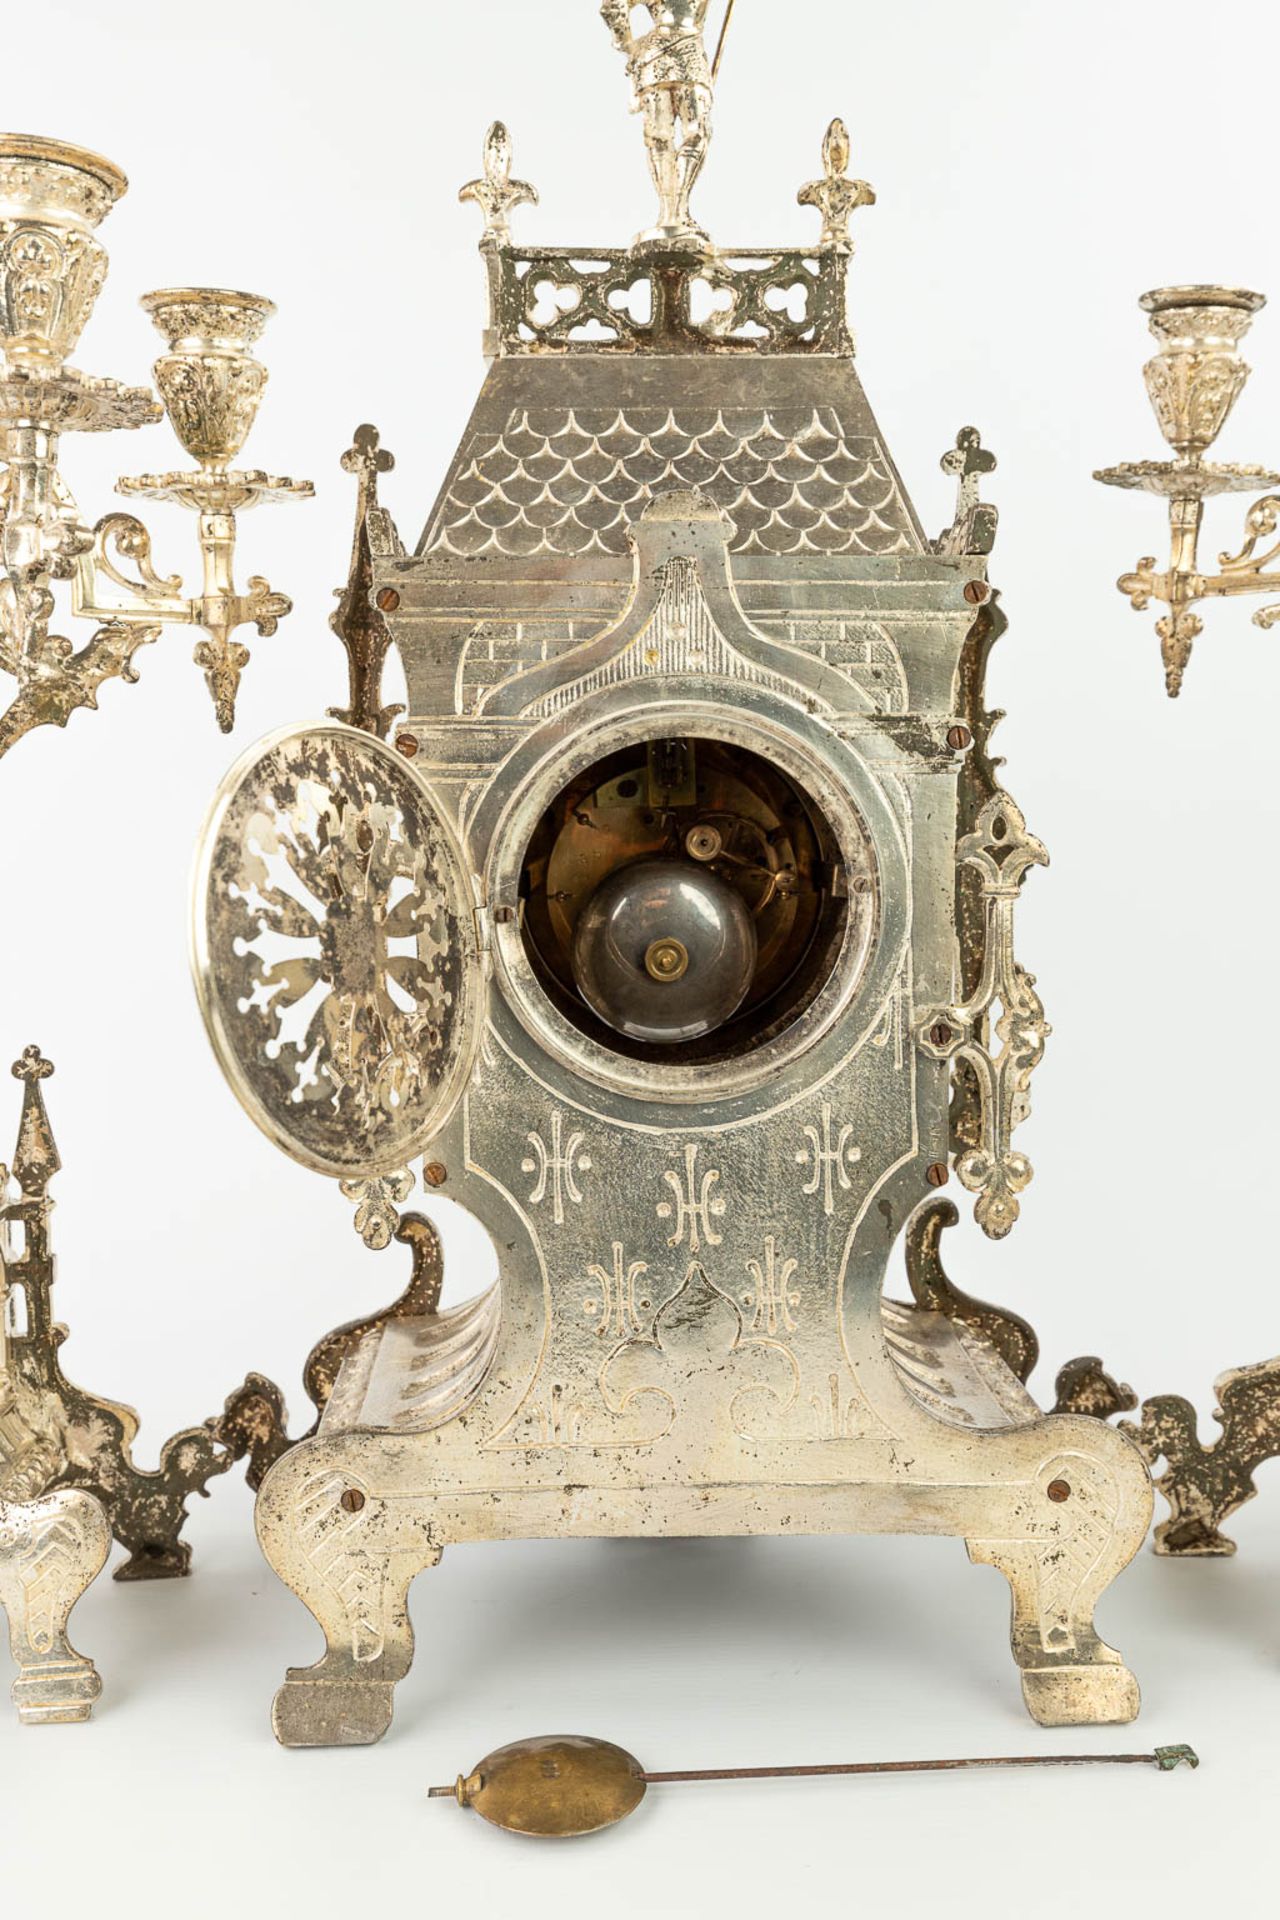 A three-piece garniture clock with candelabra, made of silver-plated bronze in gothic revival style. - Image 10 of 18